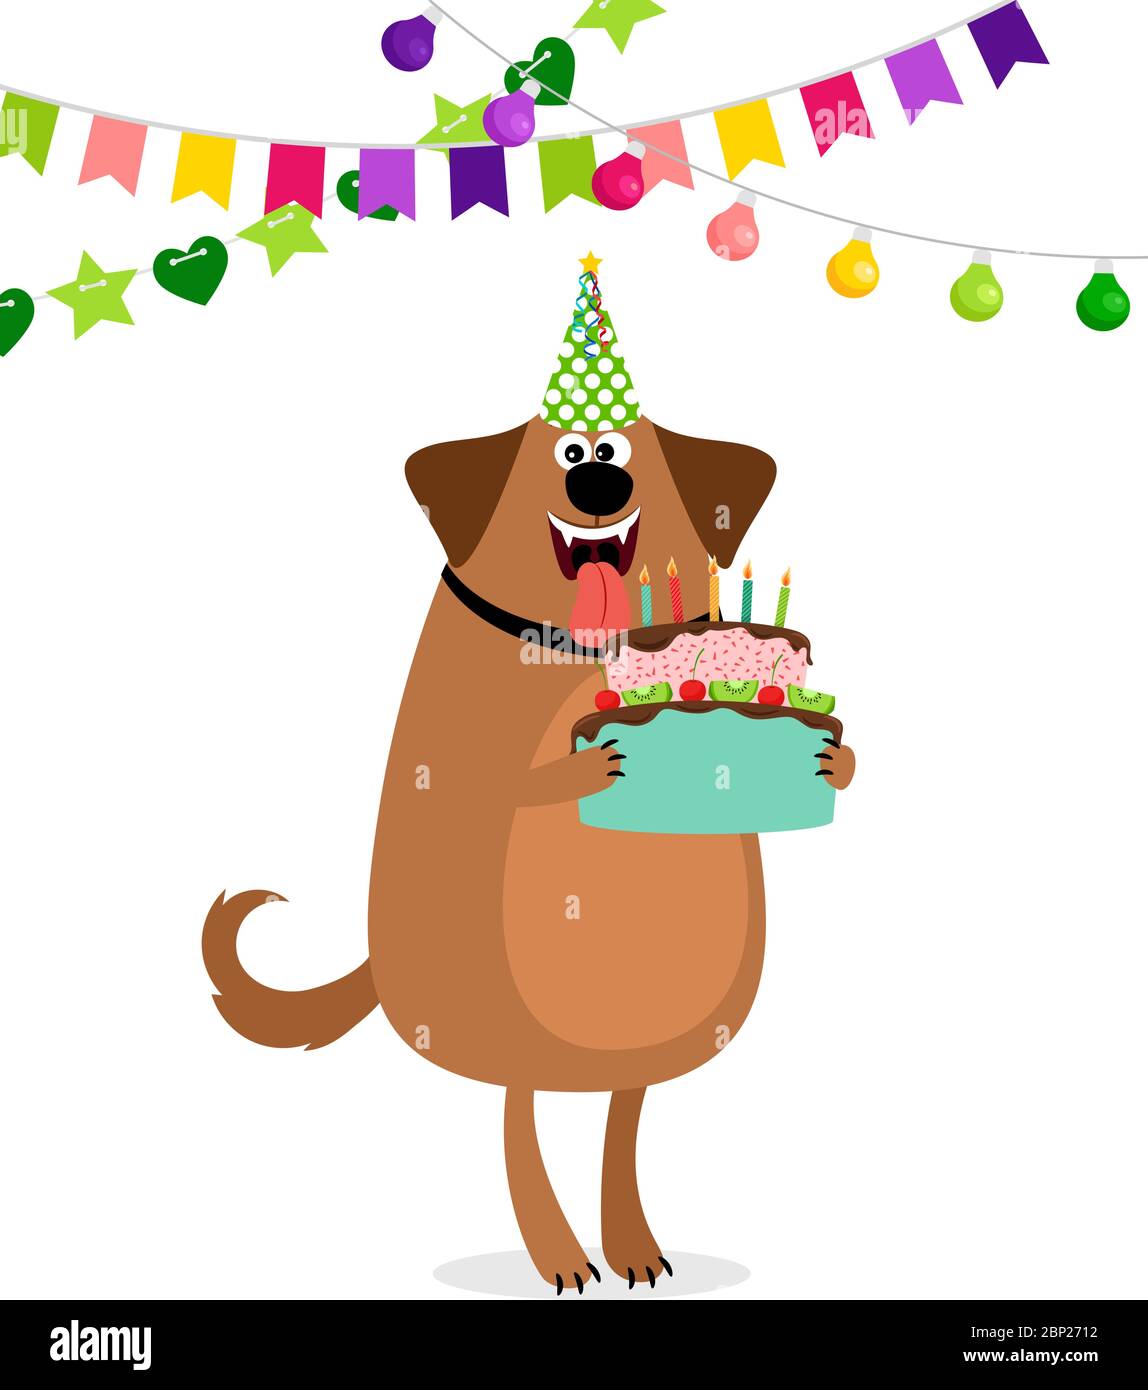 Happy birthday card with cartoon dog, cake and bounting flags ...